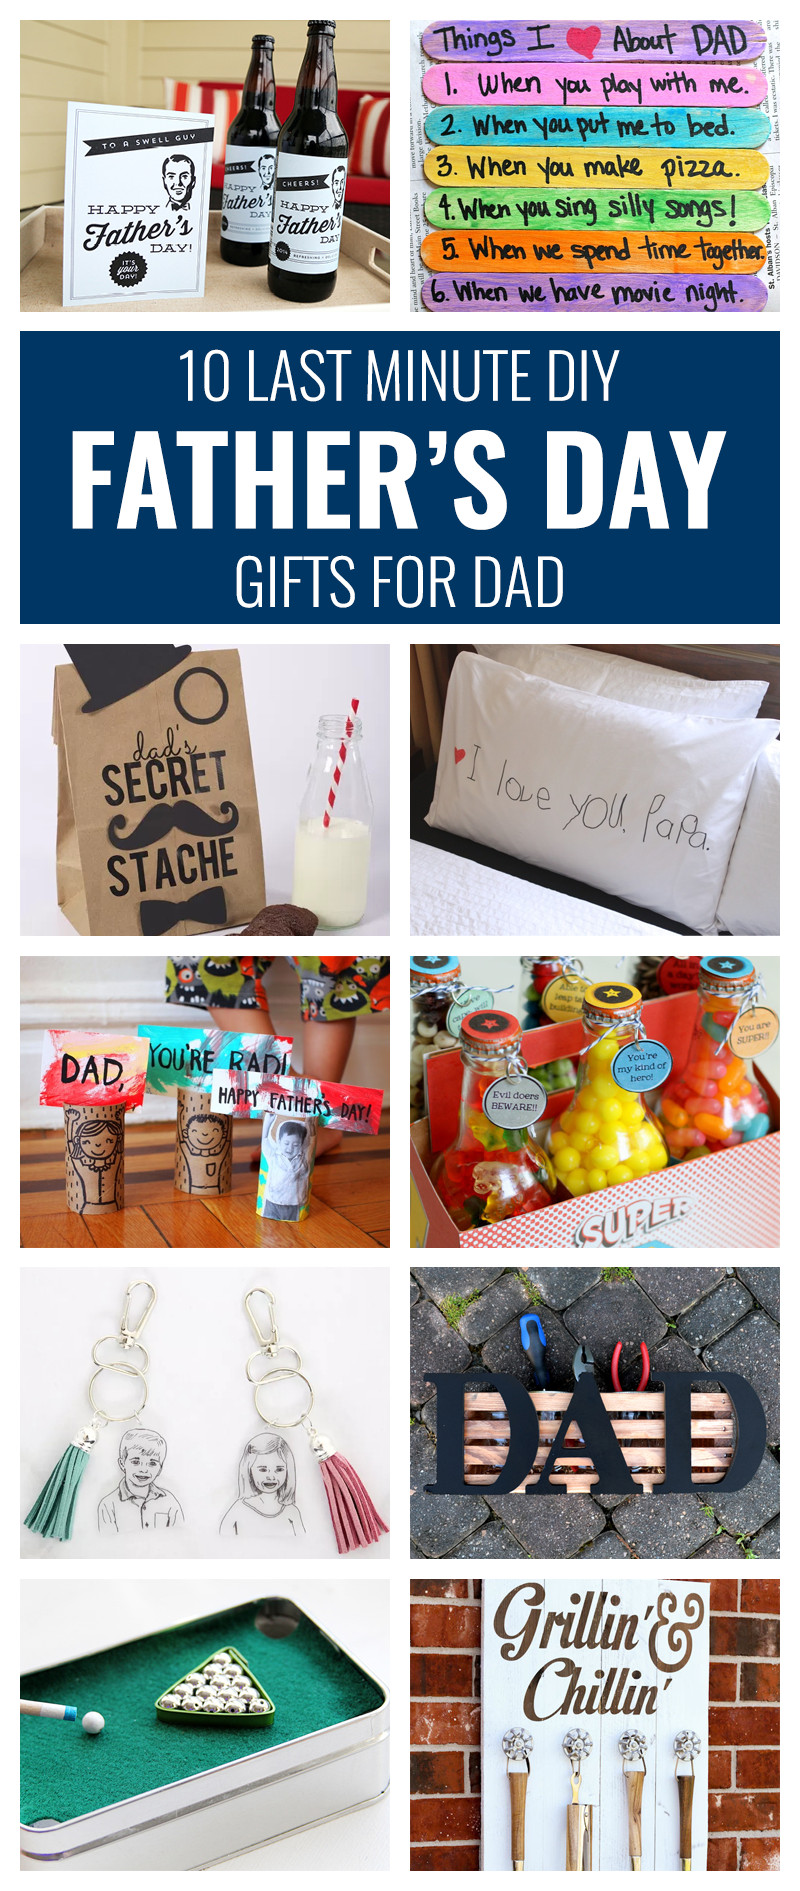 DIY Last Minute Father'S Day Gifts
 10 Last Minute DIY Father s Day Gifts for Dad